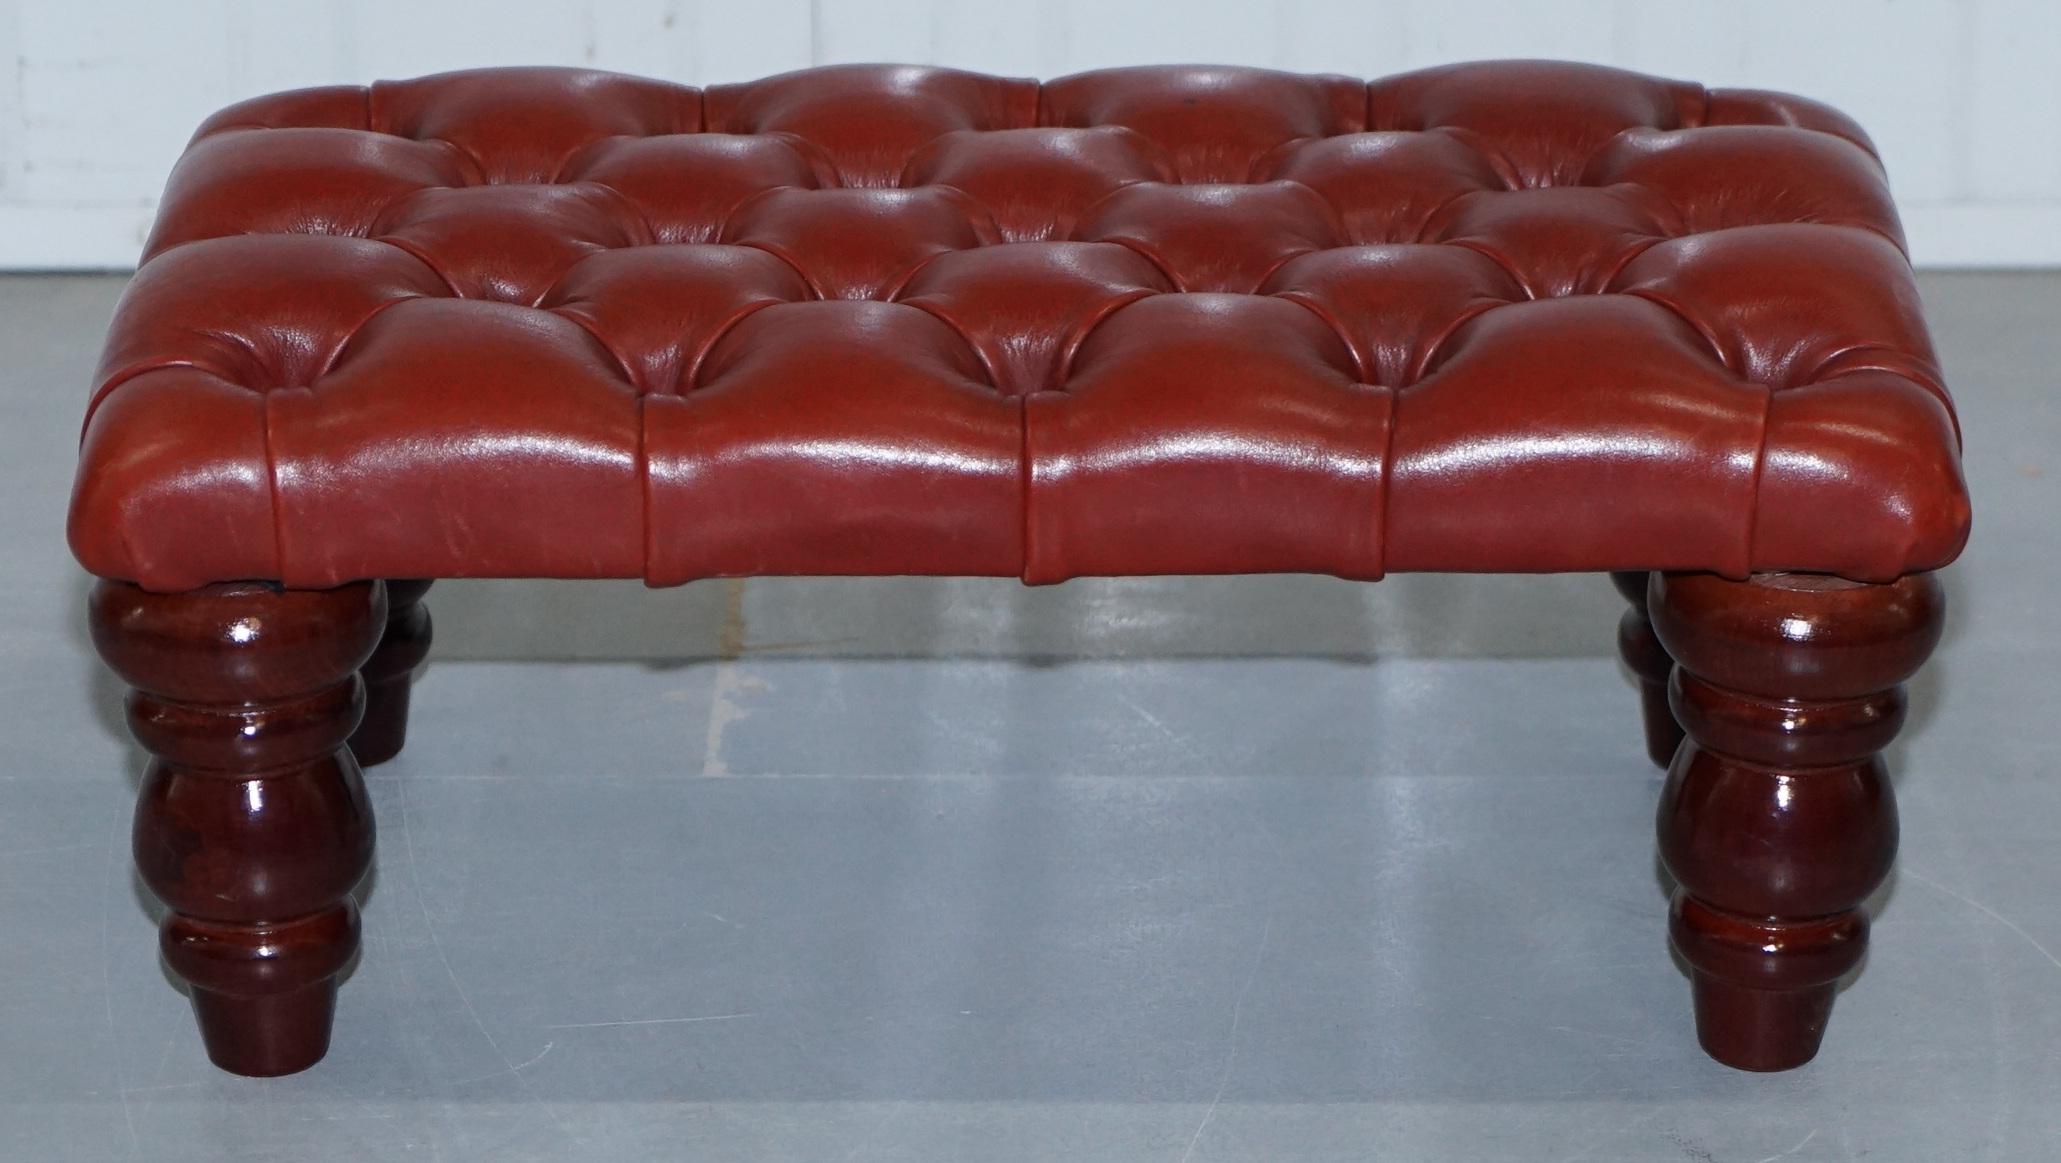 English Nice Vintage Chesterfield Oxblood Footstool Great Size for Wingback Armchairs